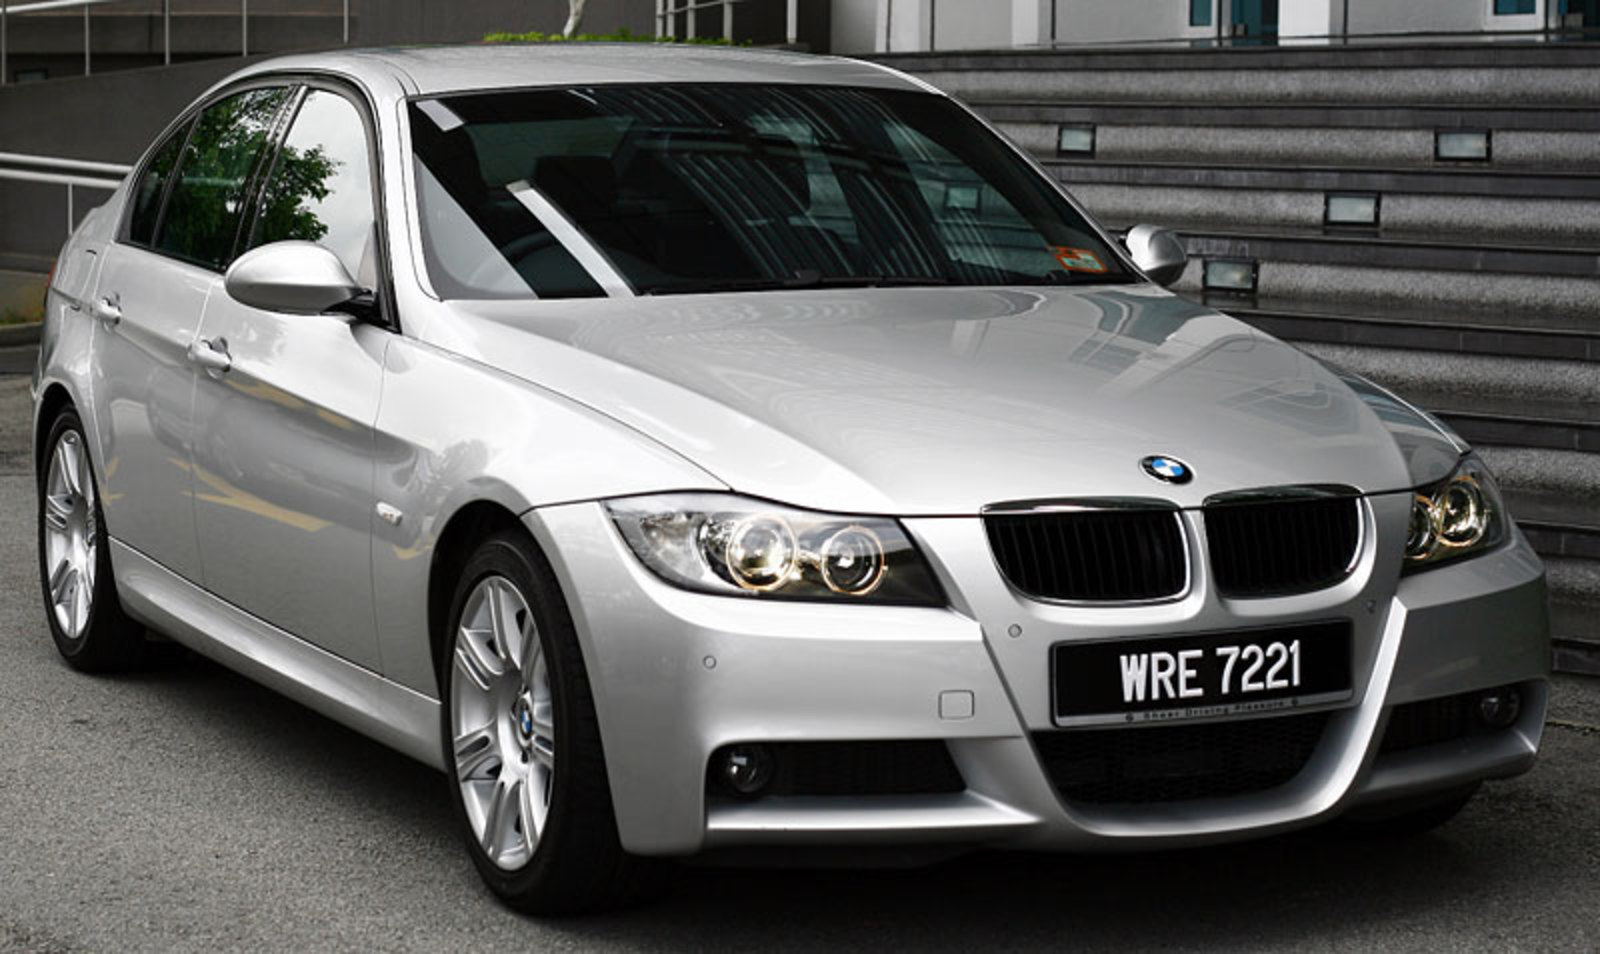 bmw 320i review. According to the World Car Guide, BMW's 3-series vehicles